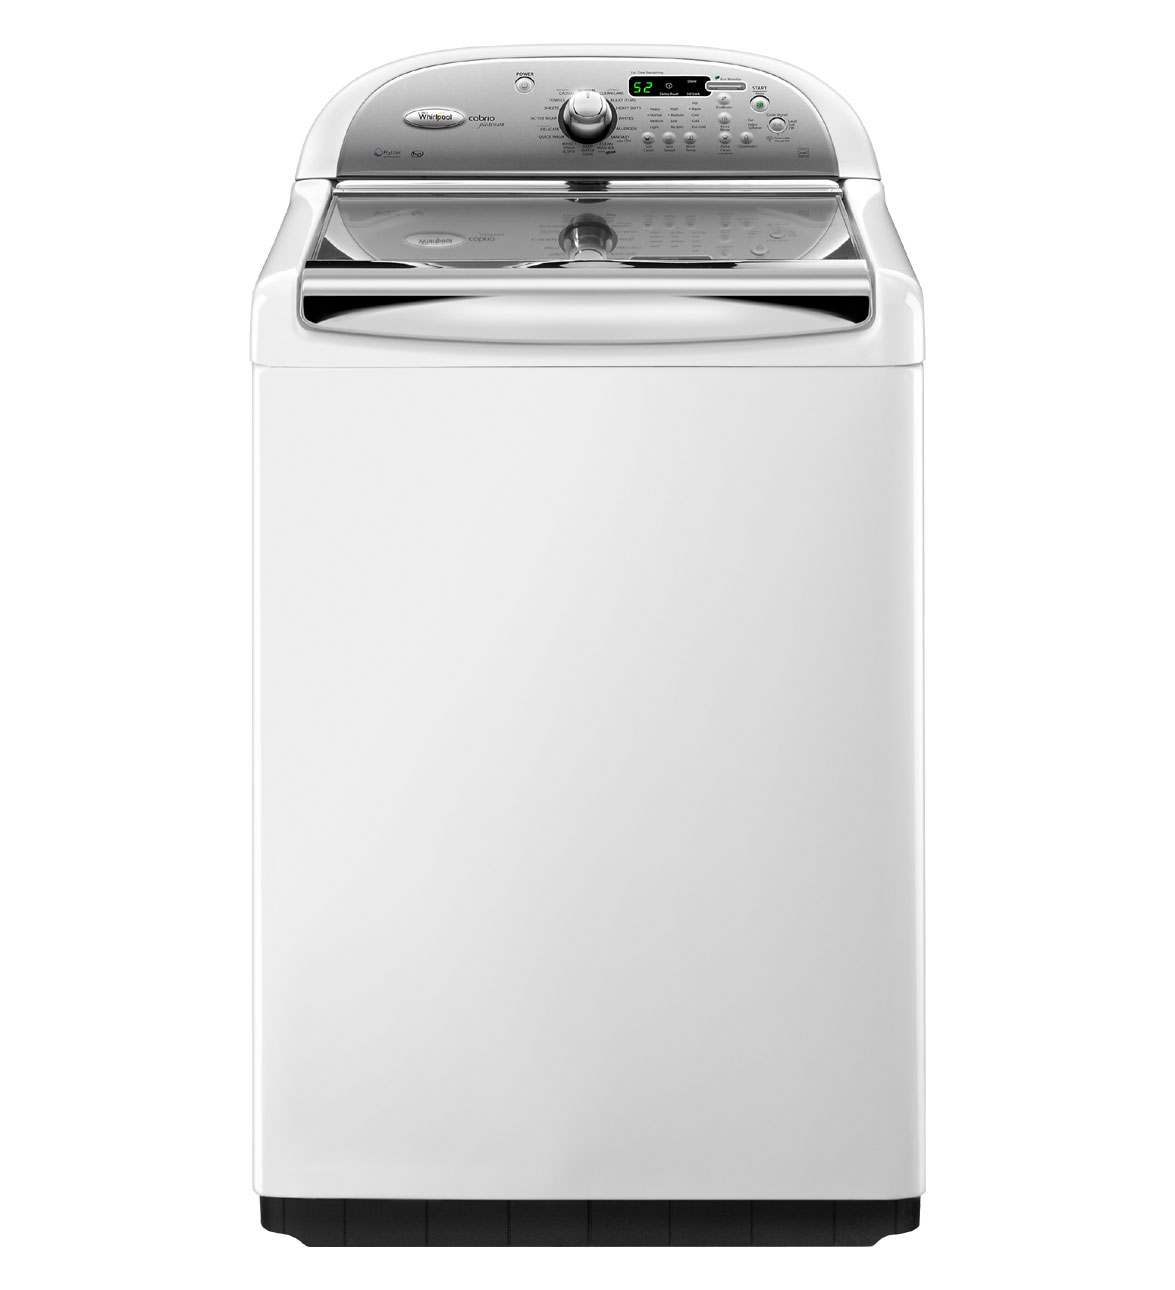 Review of Whirlpool Cabrio Platinum 4.6 cu ft High-Efficiency Top-Load Washer (White) ENERGY STAR (Model: WTW8800YW)